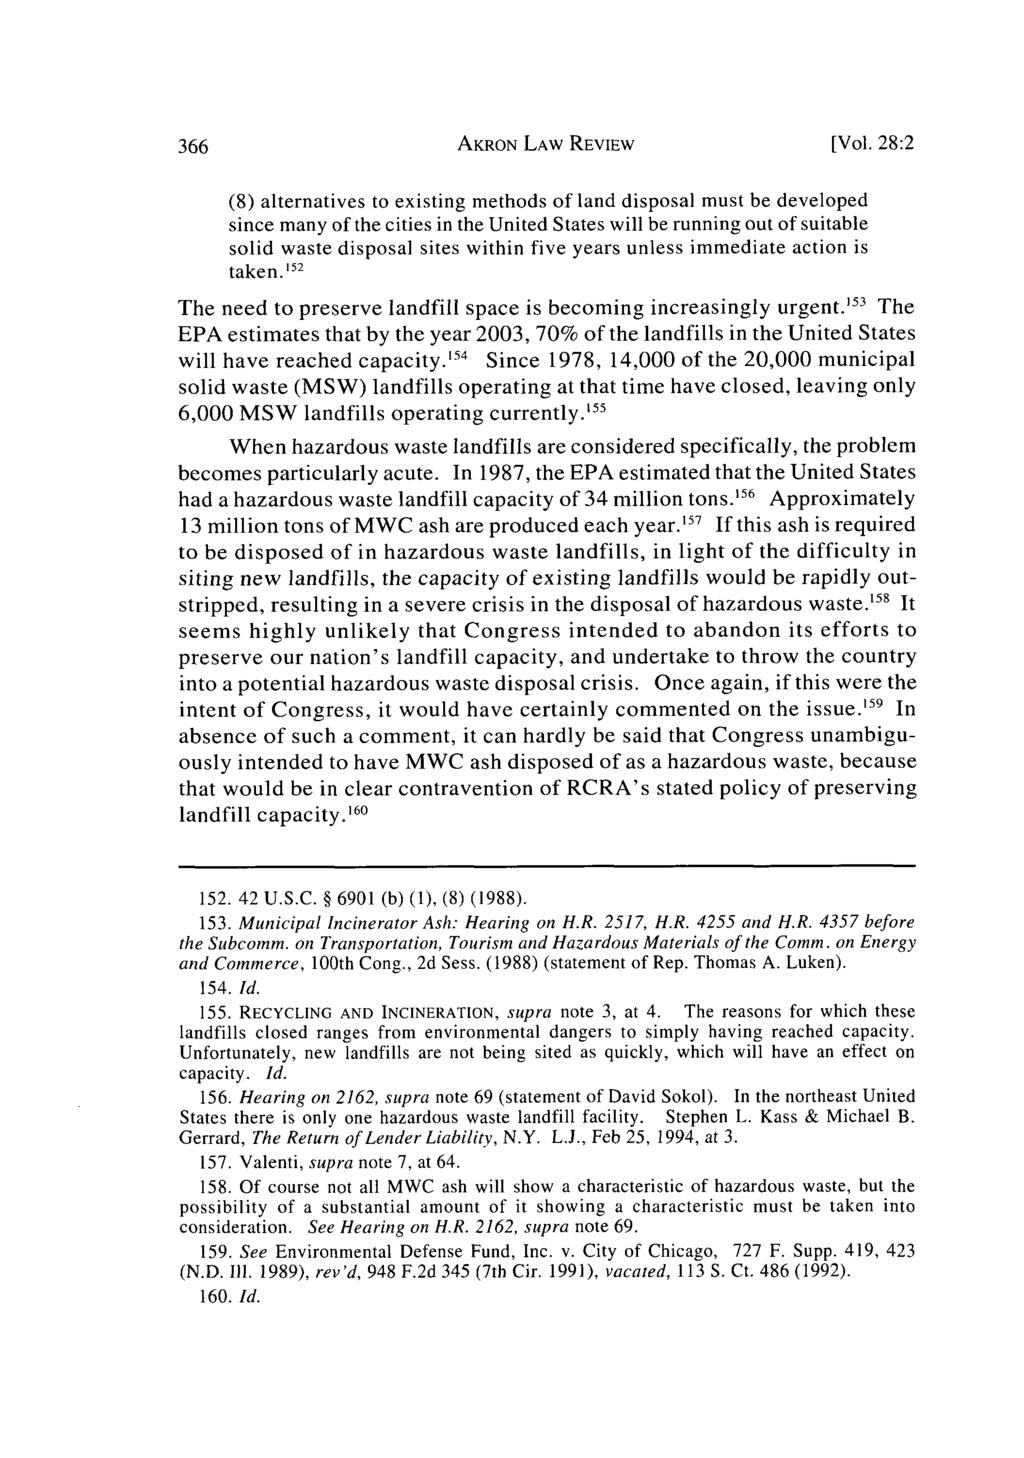 Akron Law Review, Vol. 28 [1995], Iss. 2, Art. 8 AKRON LAW REVIEW [Vol.